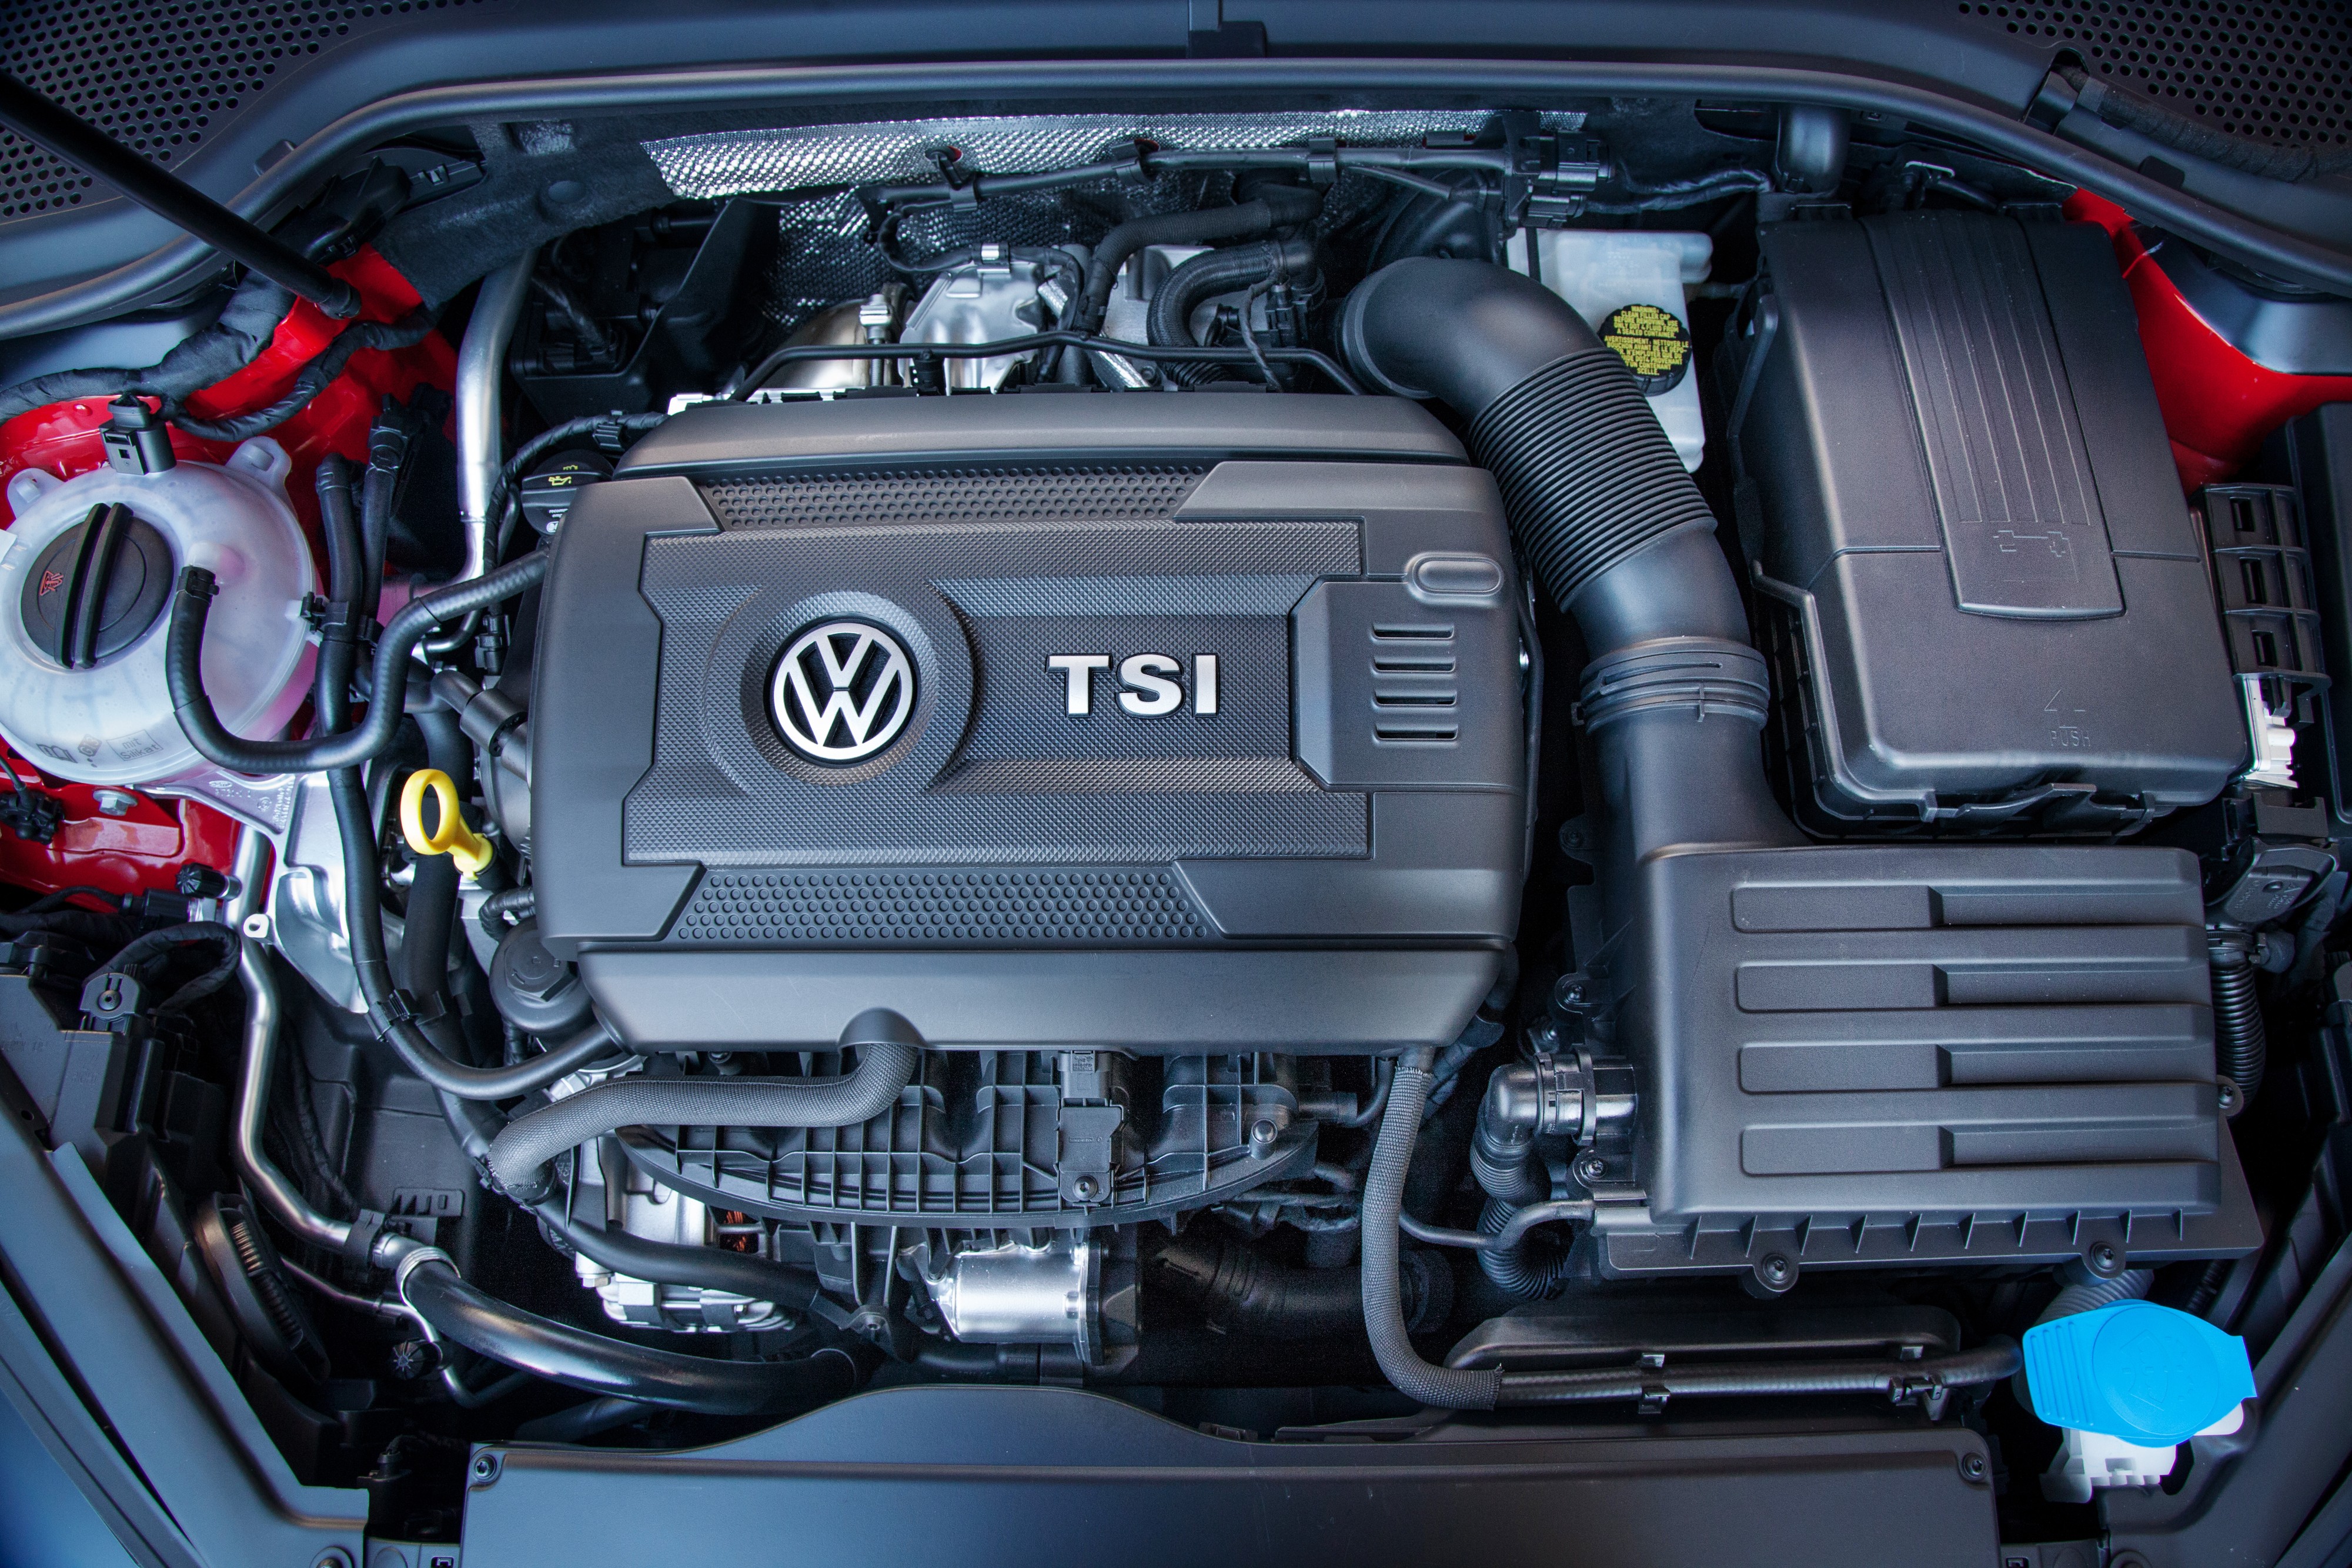 2 0 Tsi Engine Diagram Up Ing Volkswagens to Feature 1 5 Liter Engines Golf 7 Facelift Of 2 0 Tsi Engine Diagram